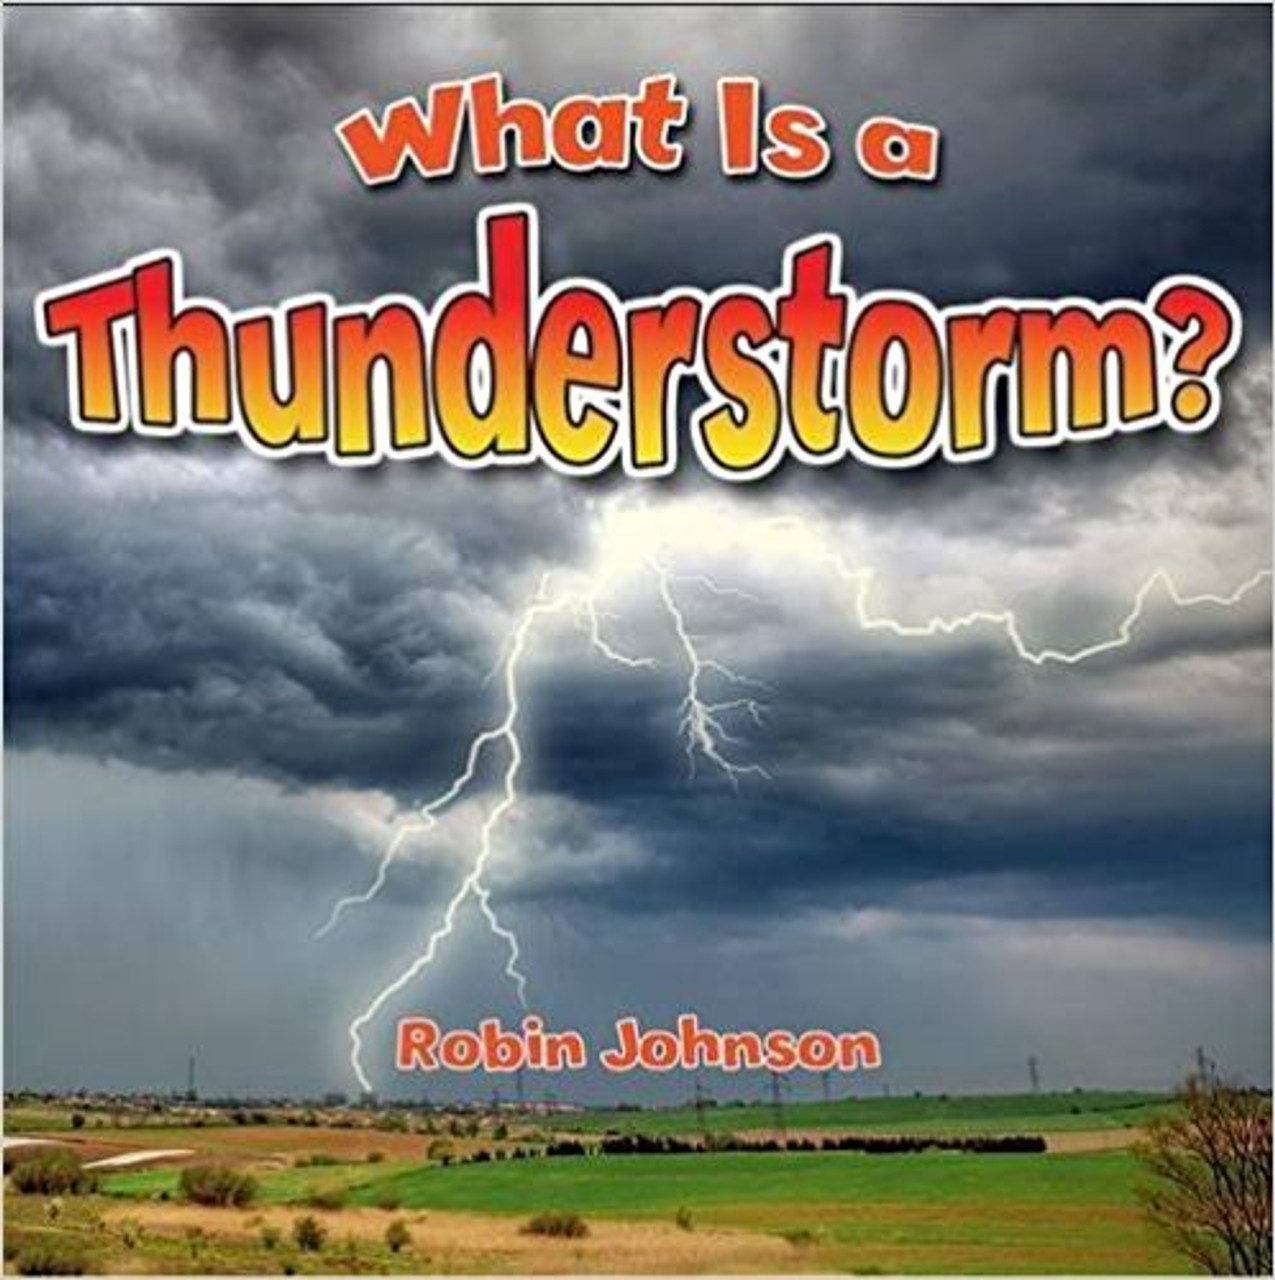 What Is a Thunderstorm? by Robin Johnson